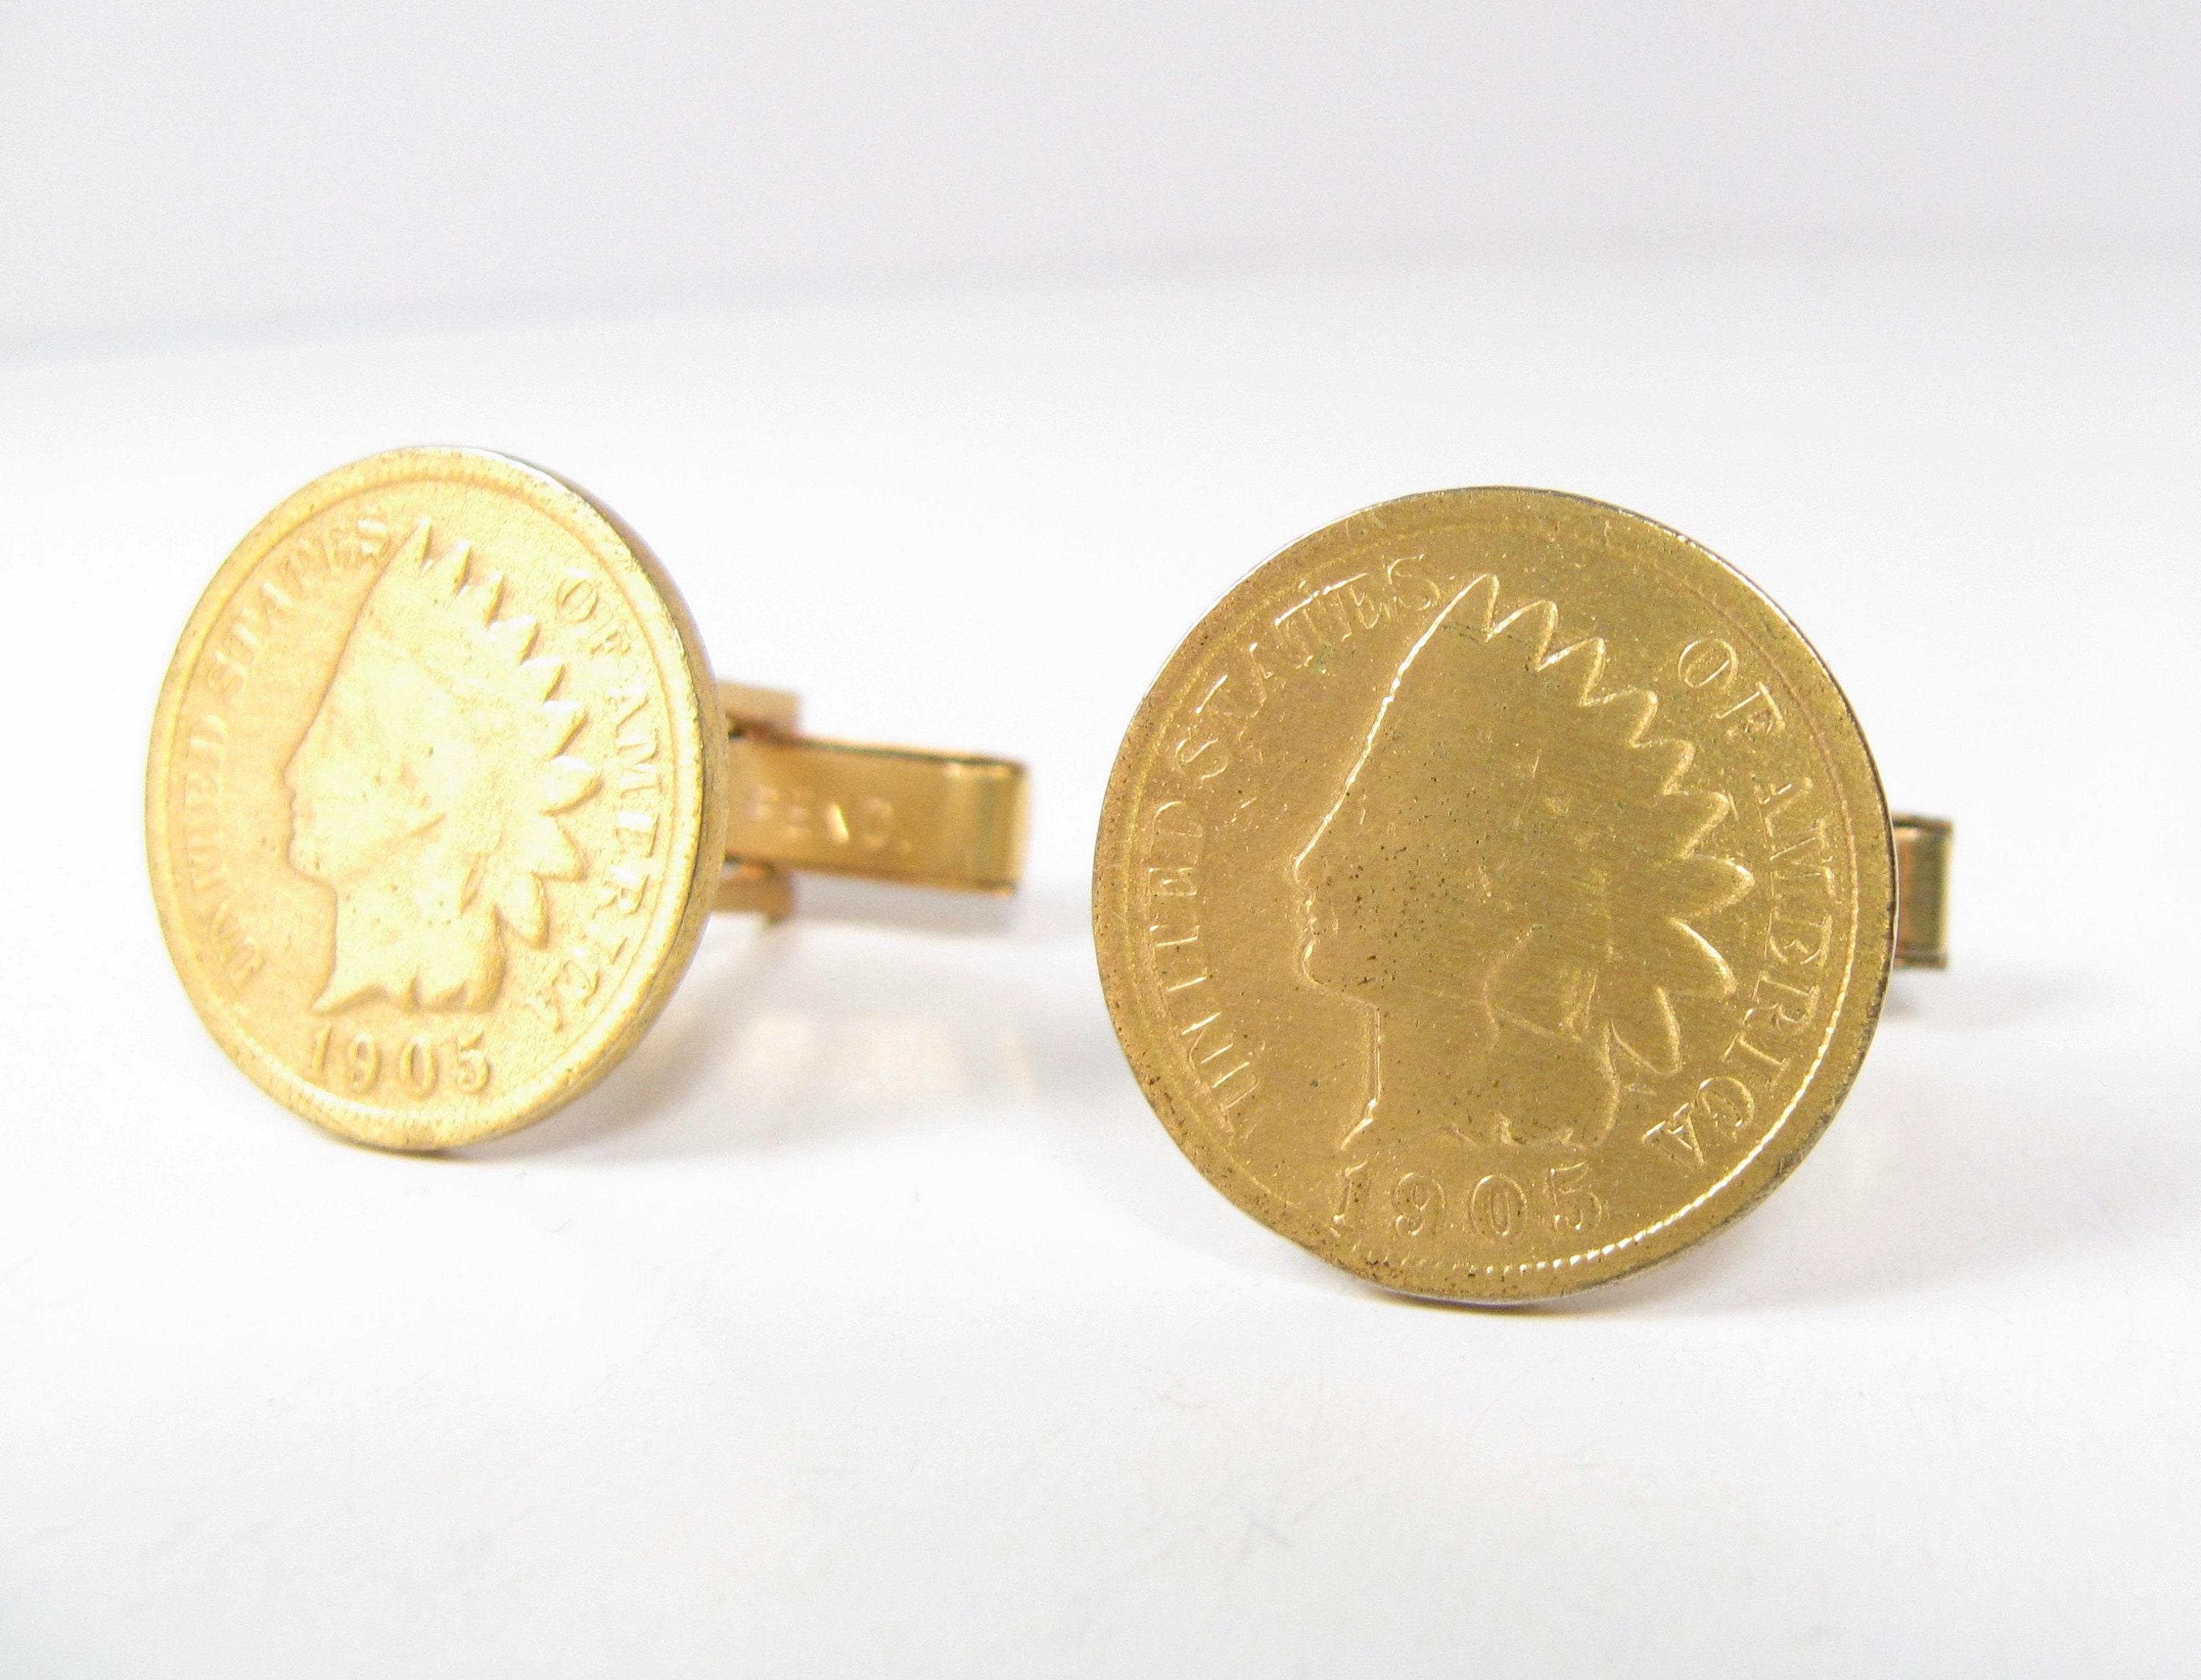 NEW Gold-Layered Indian Penny Goldtone Bezel Coin Cuff Links 14141 